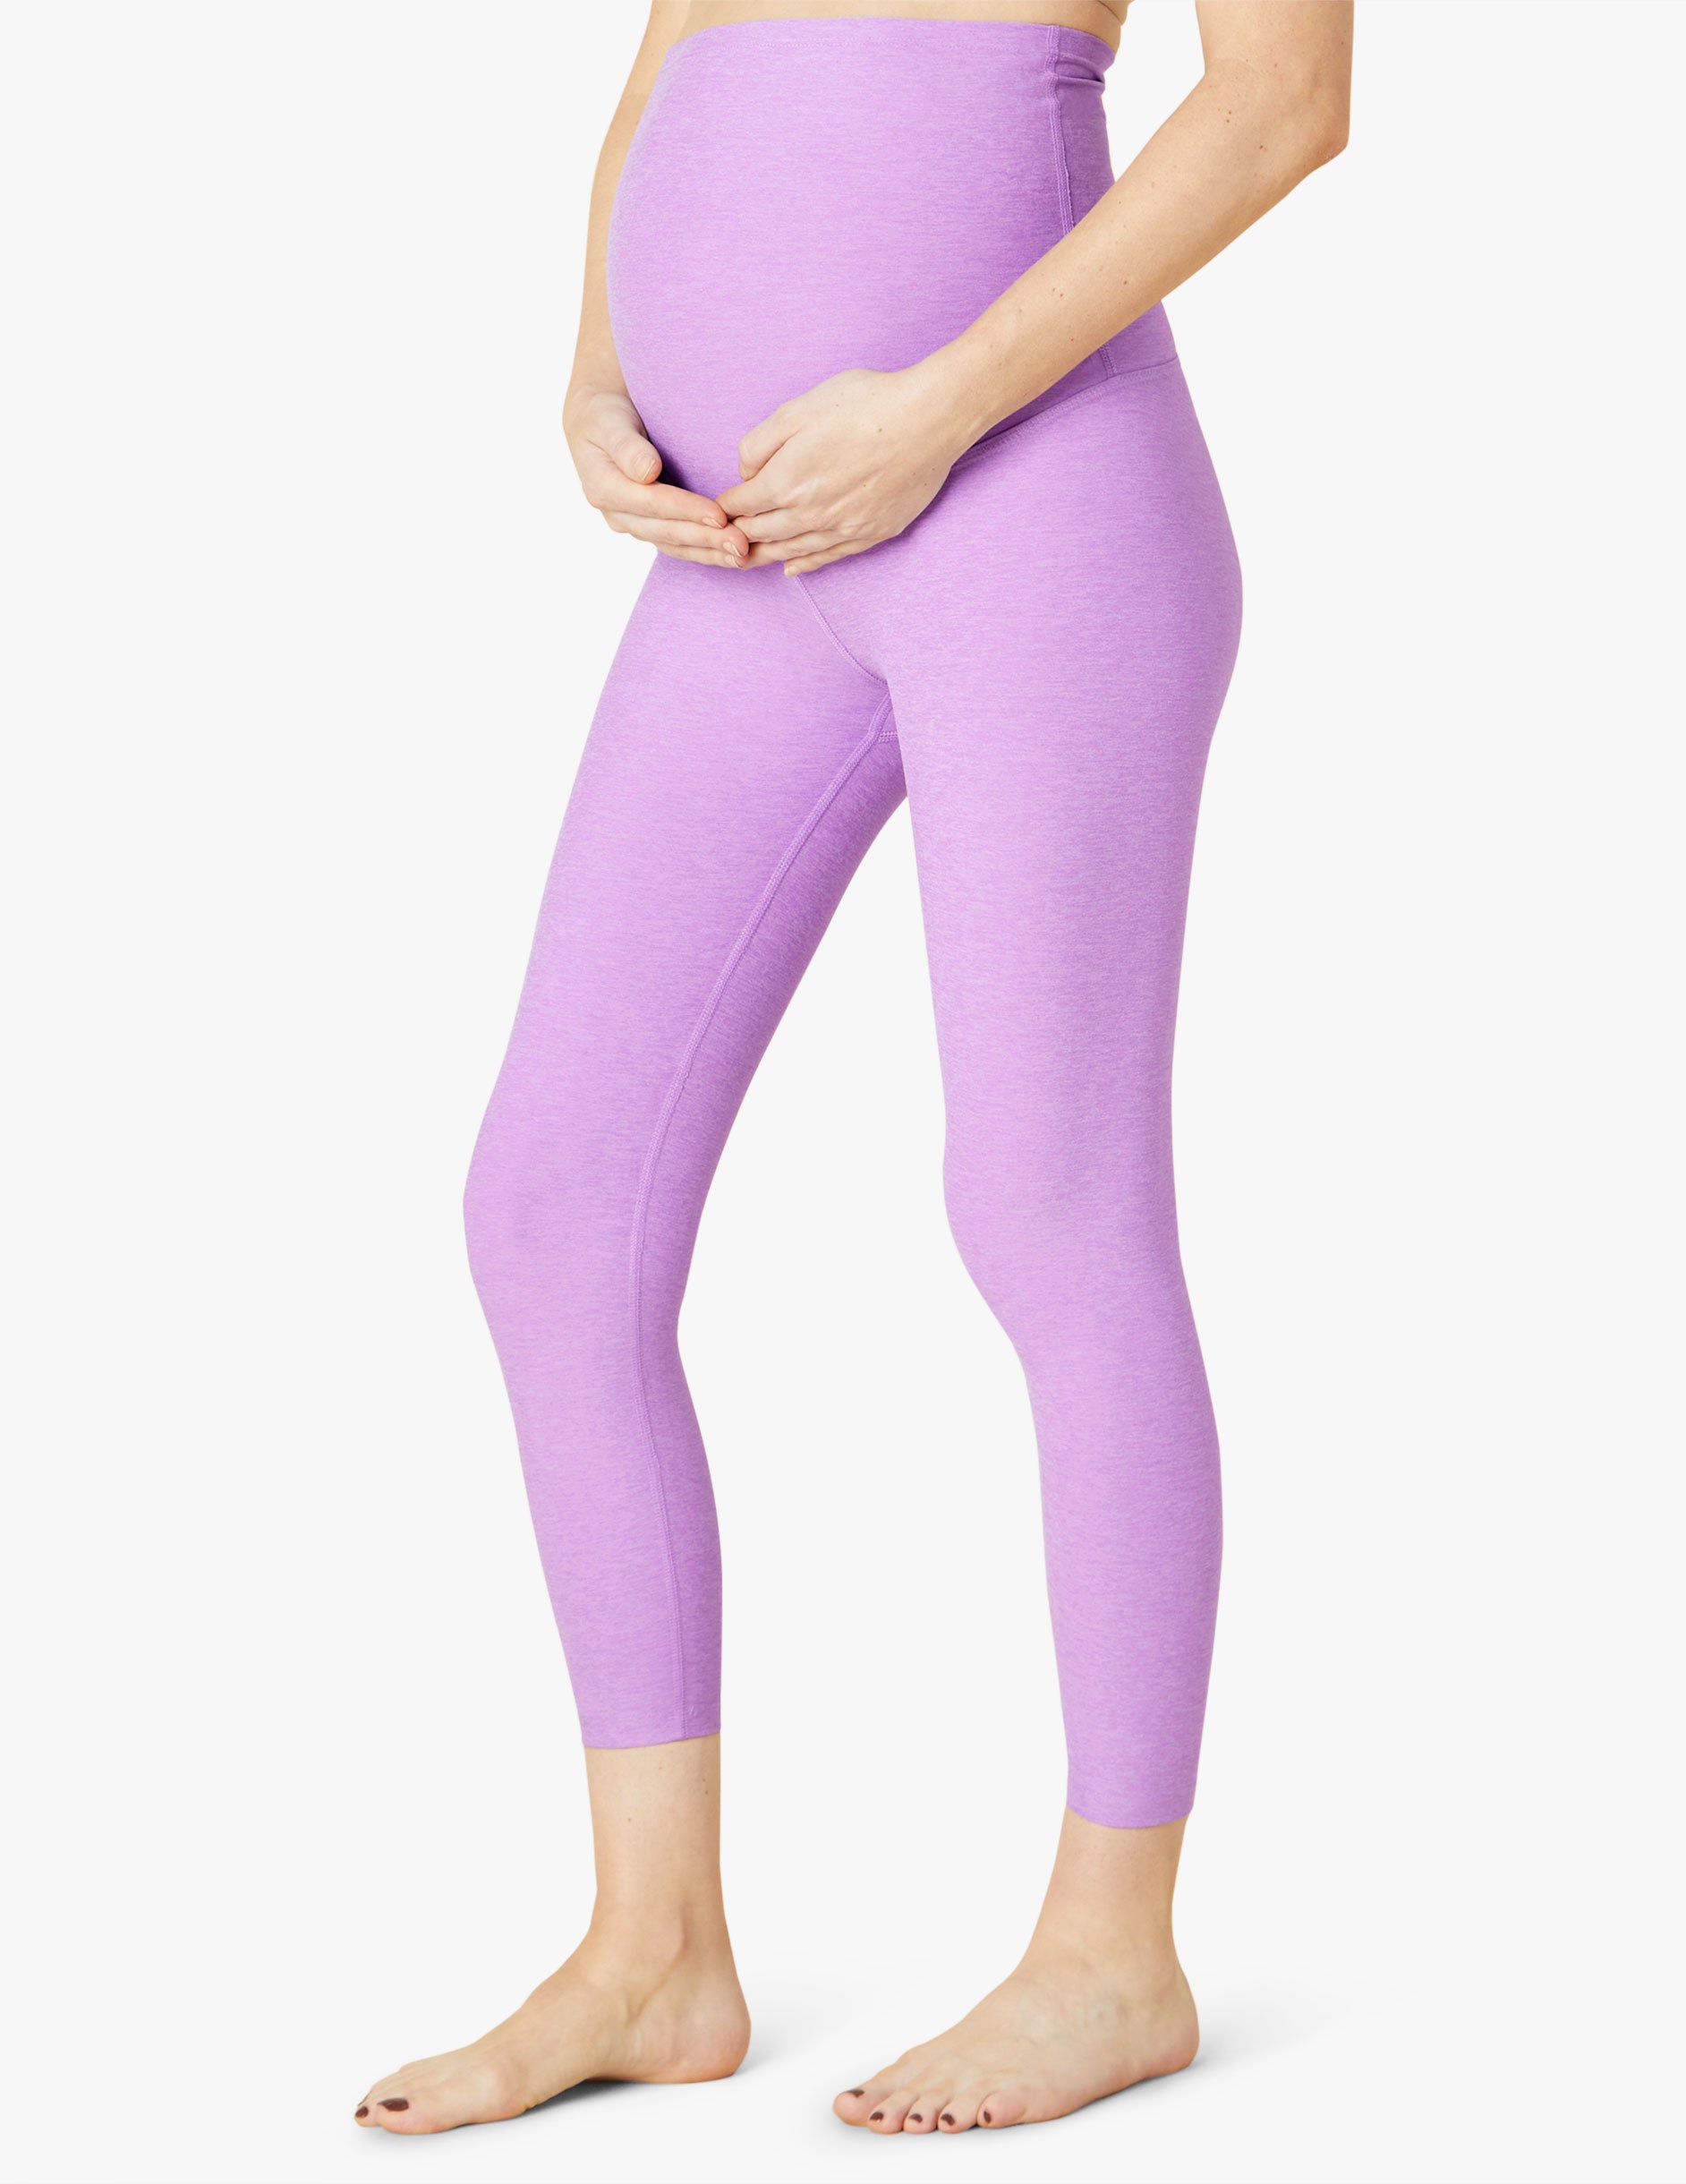 Zivame Shimmer Stretch Ankle Length Leggings - Mulberry Purple